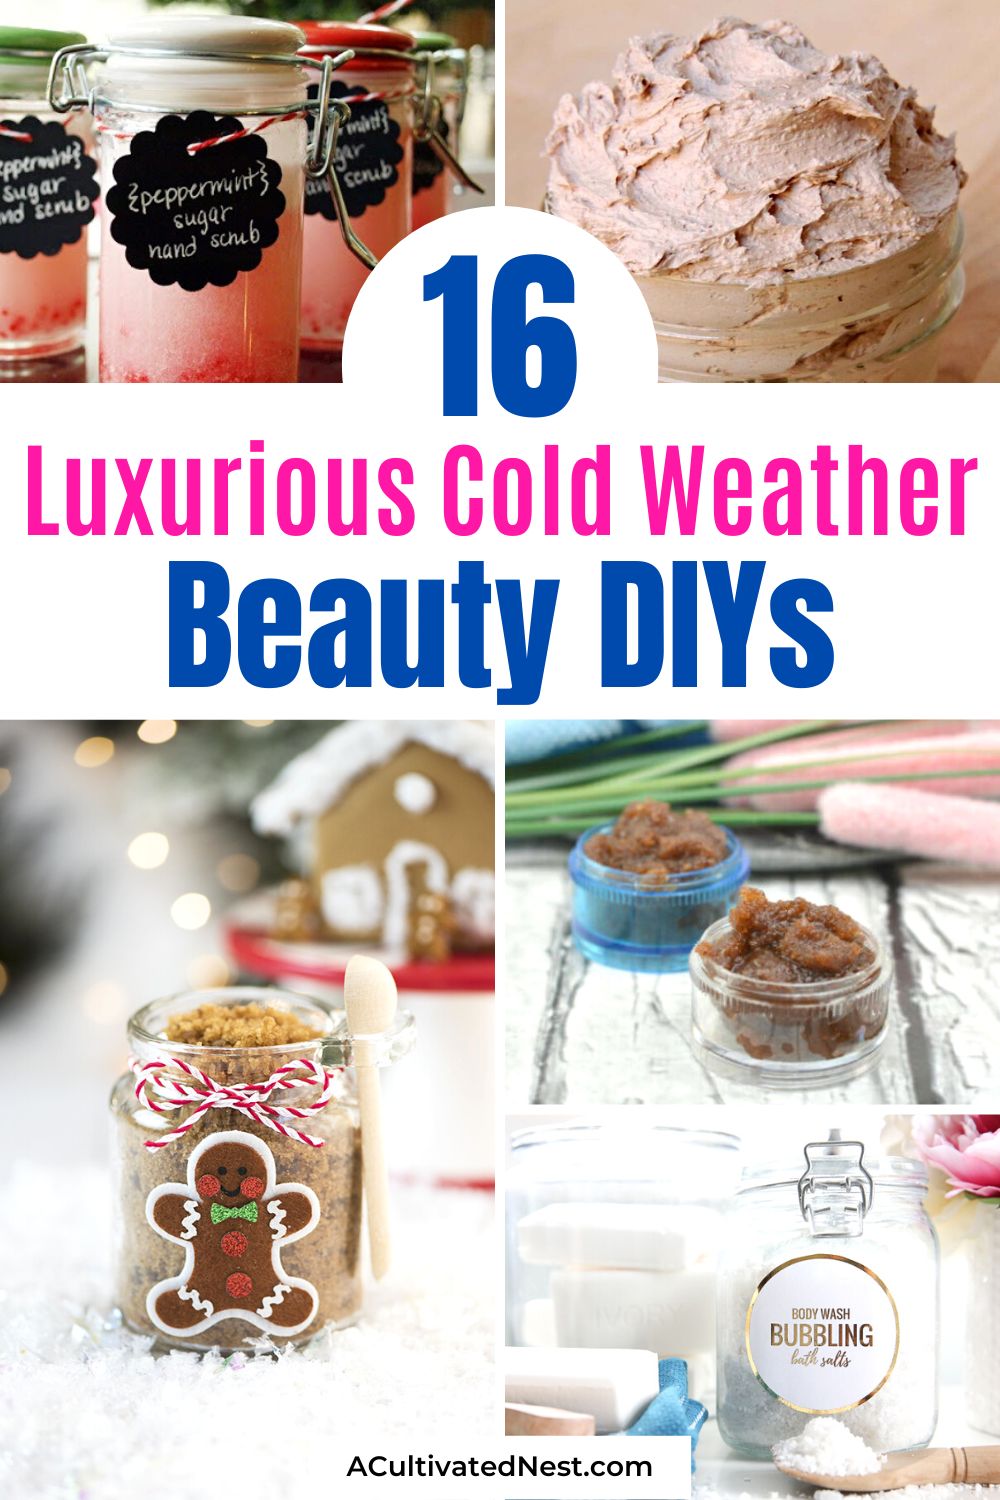 16 Luxurious Cold Weather Beauty DIYs- Elevate your winter beauty routine with these indulgent cold weather DIYs! Unwind with homemade spa treatments and embrace the cozy season in style. Glow through the chill! | #homemadeBeauty #skincare #beautyProducts #diyProjects #ACultivatedNest